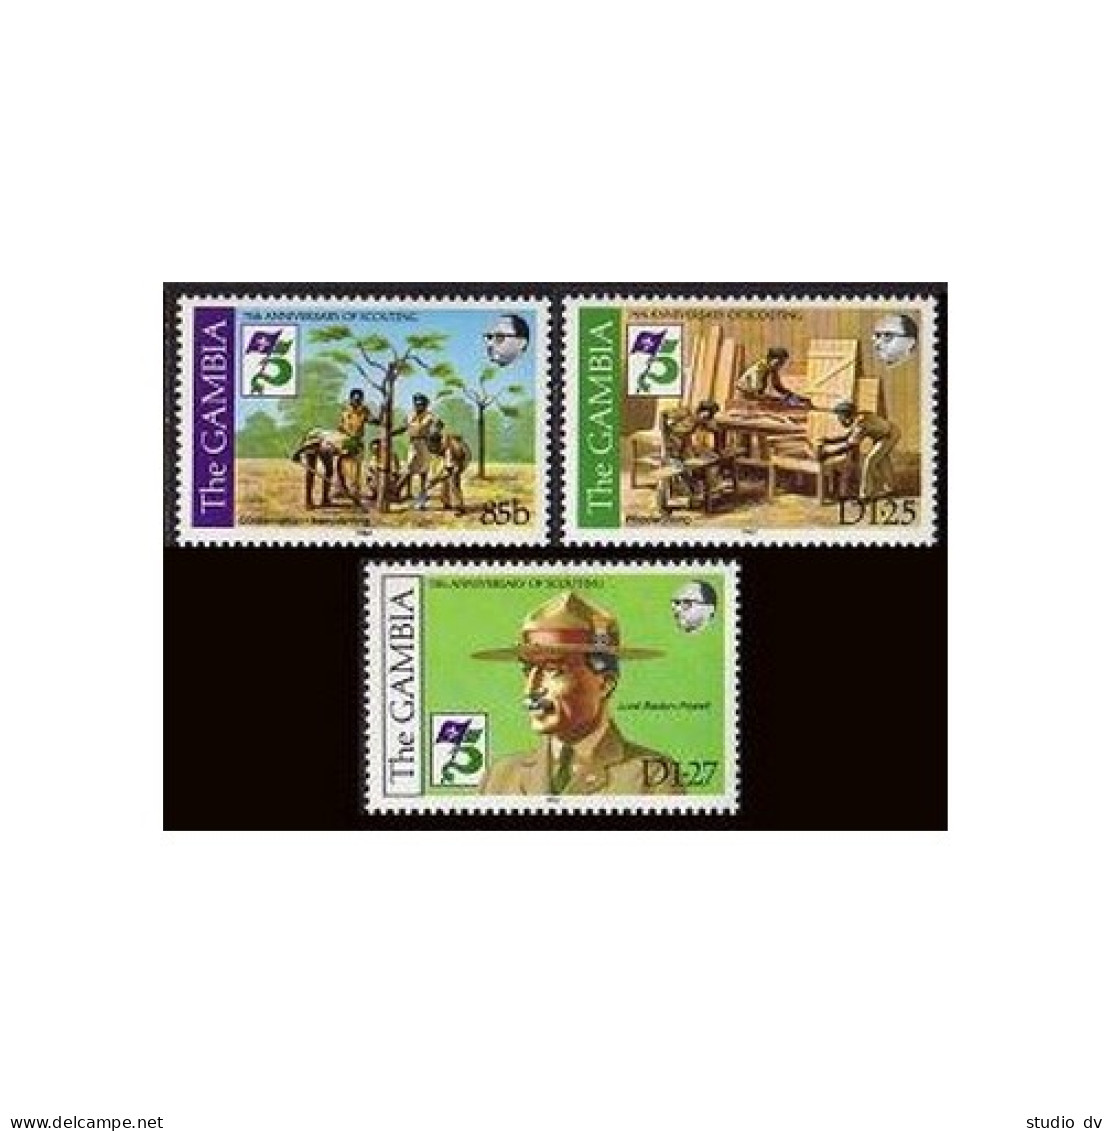 Gambia 440-442, MNH. Michel 438-440. Scouting Year 1982. Baden-Powell. - Gambia (1965-...)